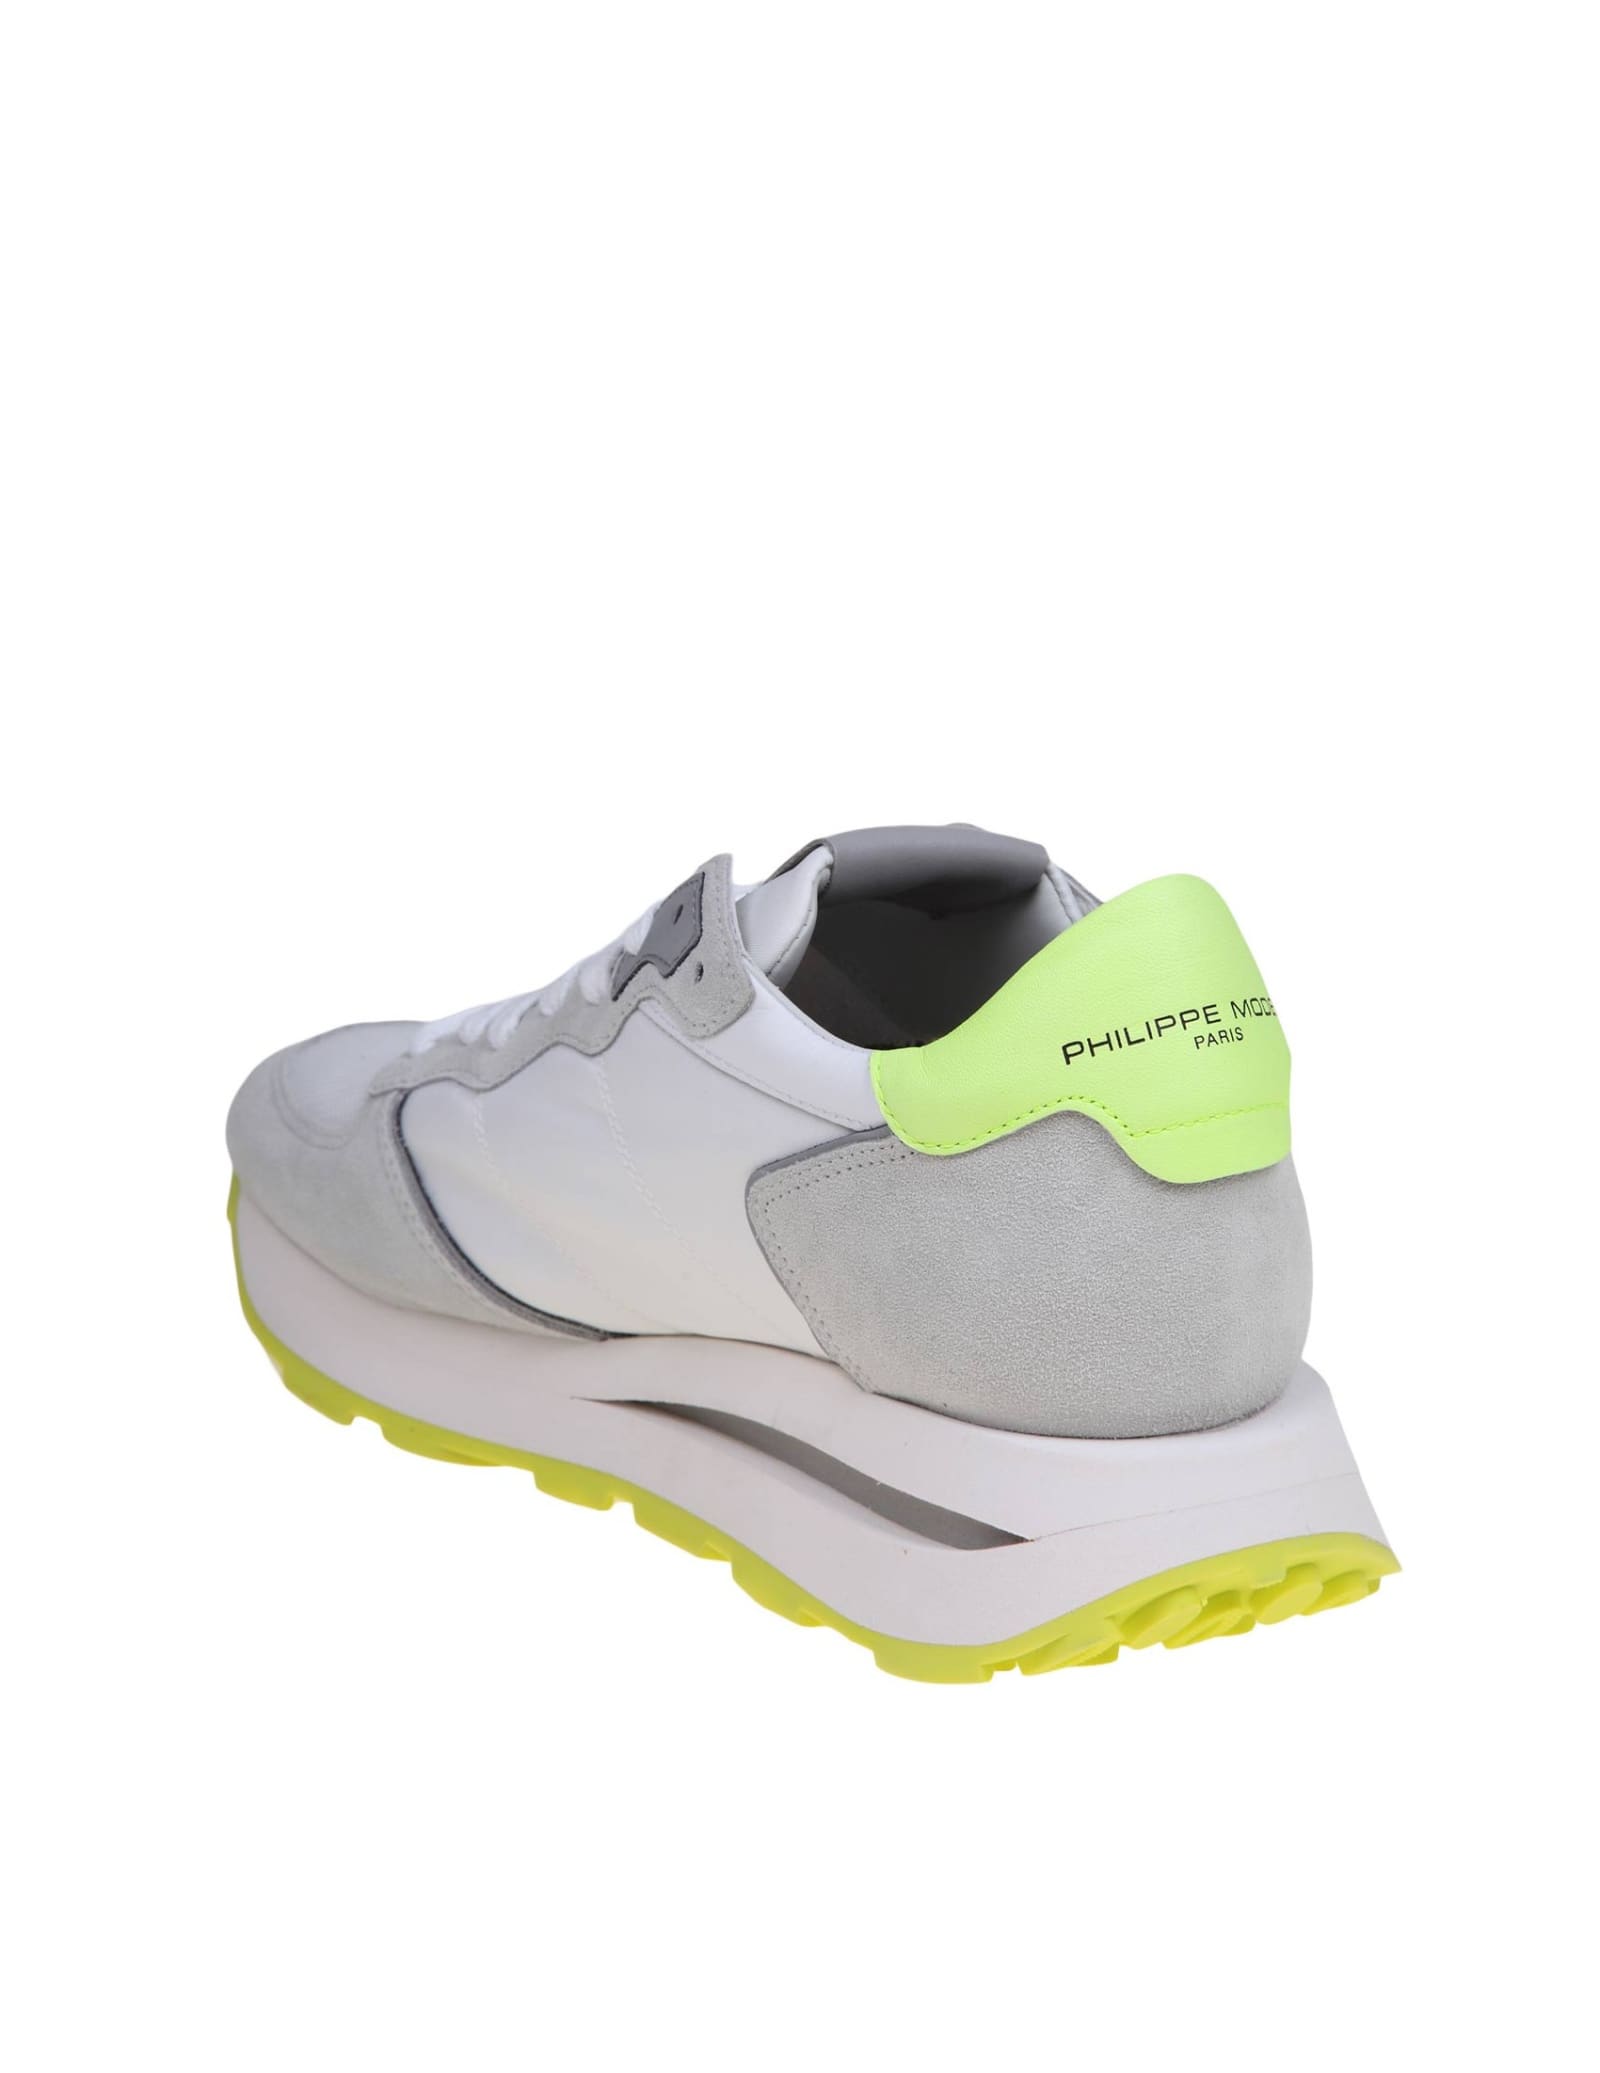 Shop Philippe Model Tropez Haute Low Sneakers In Suede And Nylon Color White And Yellow In Blanc/jaune